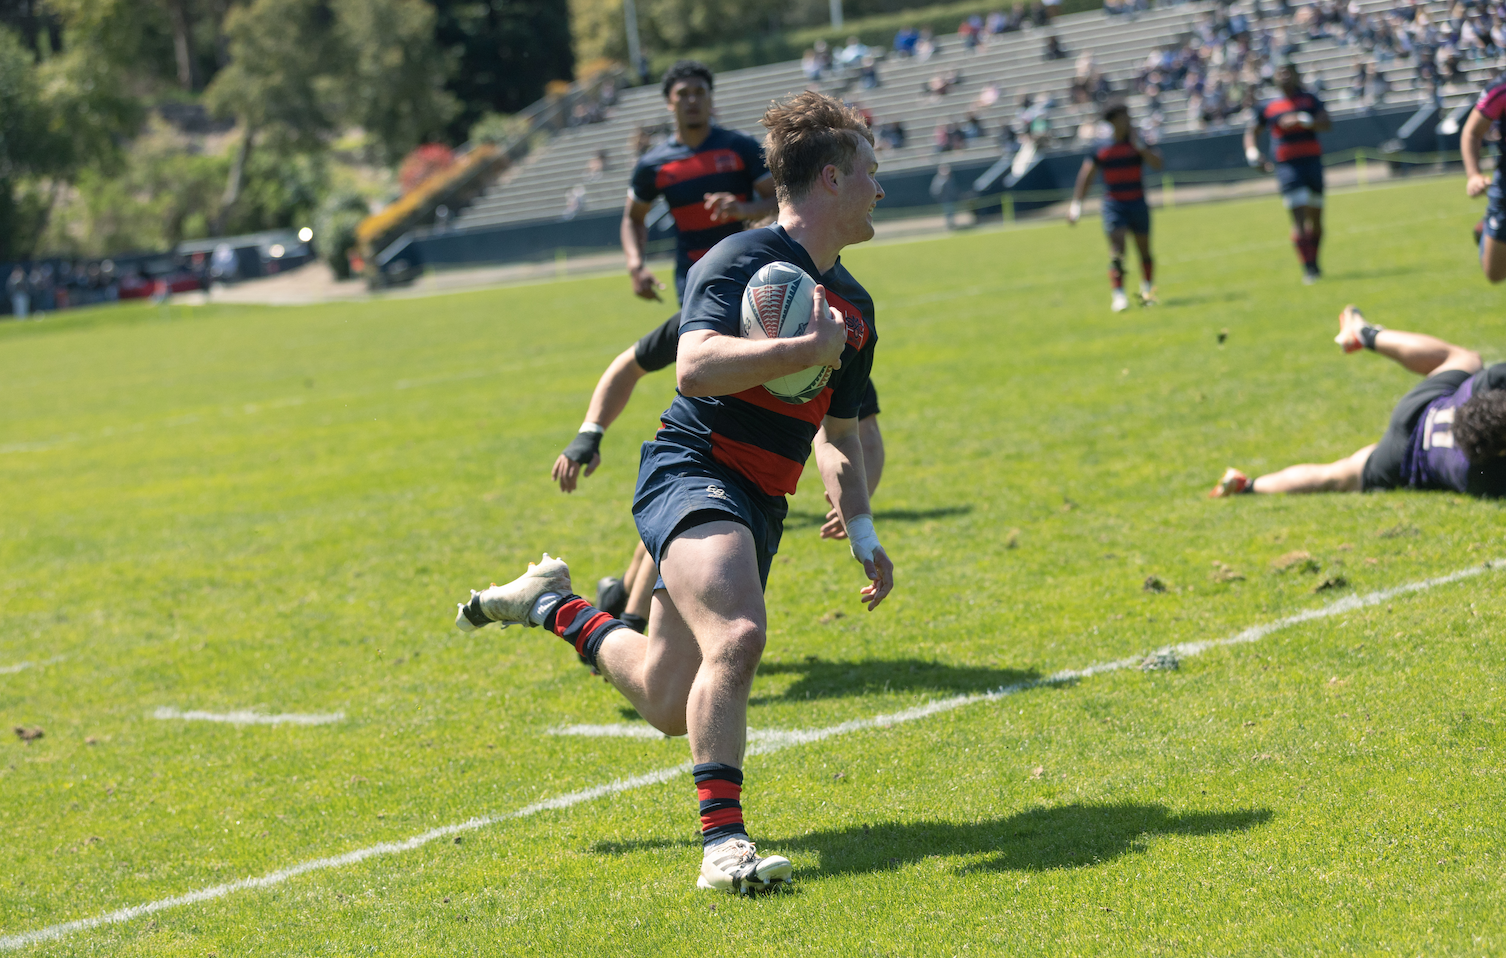 Tatum Pappas runs into the try zone for Men's Rugby